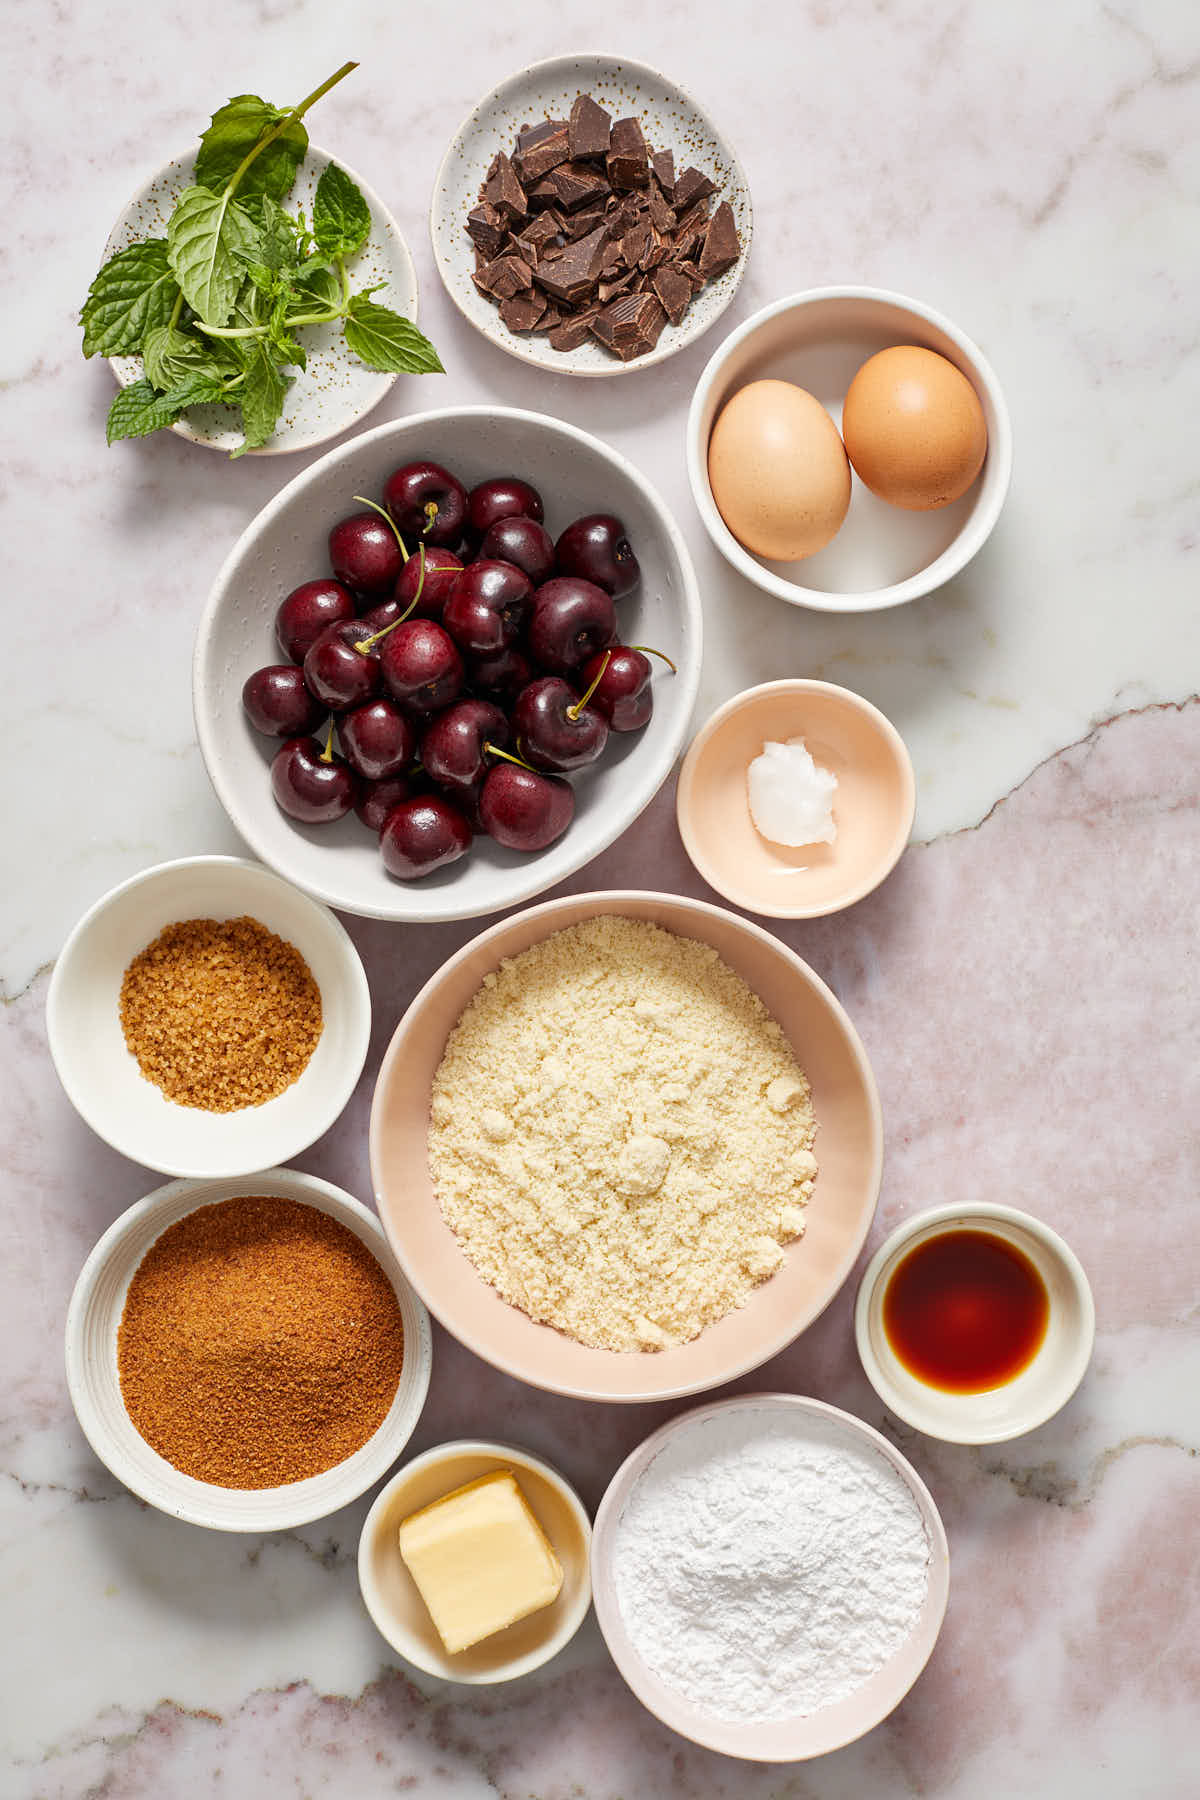 Ingredients to make an almond flour cherry galette arranged in individual bowls.